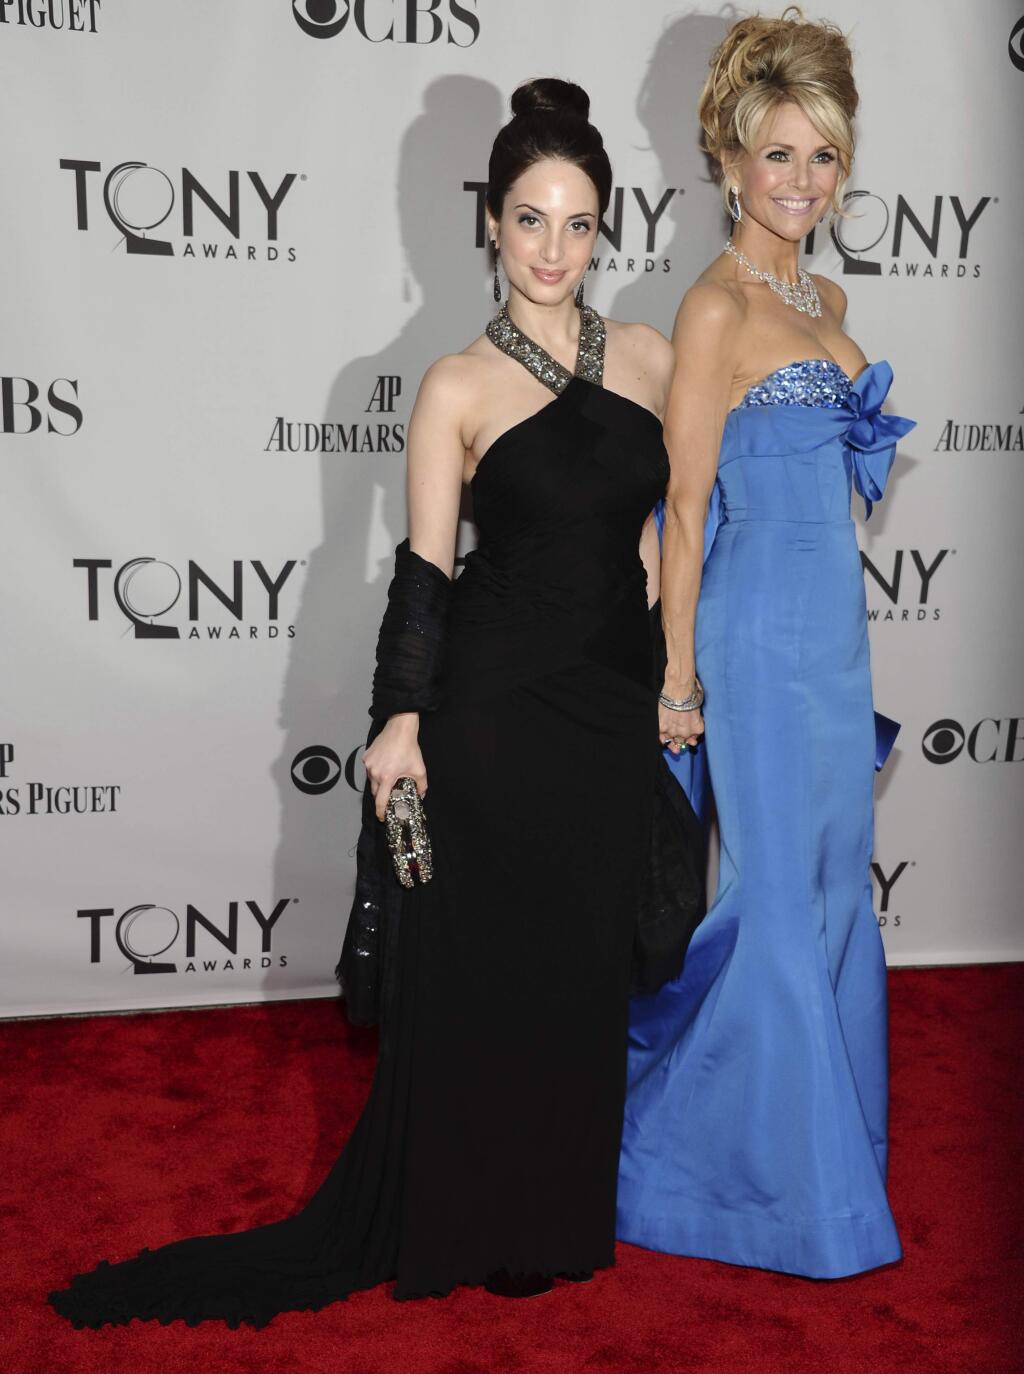 FILE - In this Sunday, June 12, 2011, file photo, Christie Brinkley, left, and her daughter Alexa Ray Joel arrive at the 65th annual Tony Awards, in New York. Christie Brinkley is returning to the pages of the Sports Illustrated Swimsuit issue at age 63 and this time she‚Äôs also appearing with her two daughters. Brinkley will appear with her daughters, Joel and Sailor Brinkley Cook, in the issue coming out February 2017. (AP Photo/Charles Sykes, File)